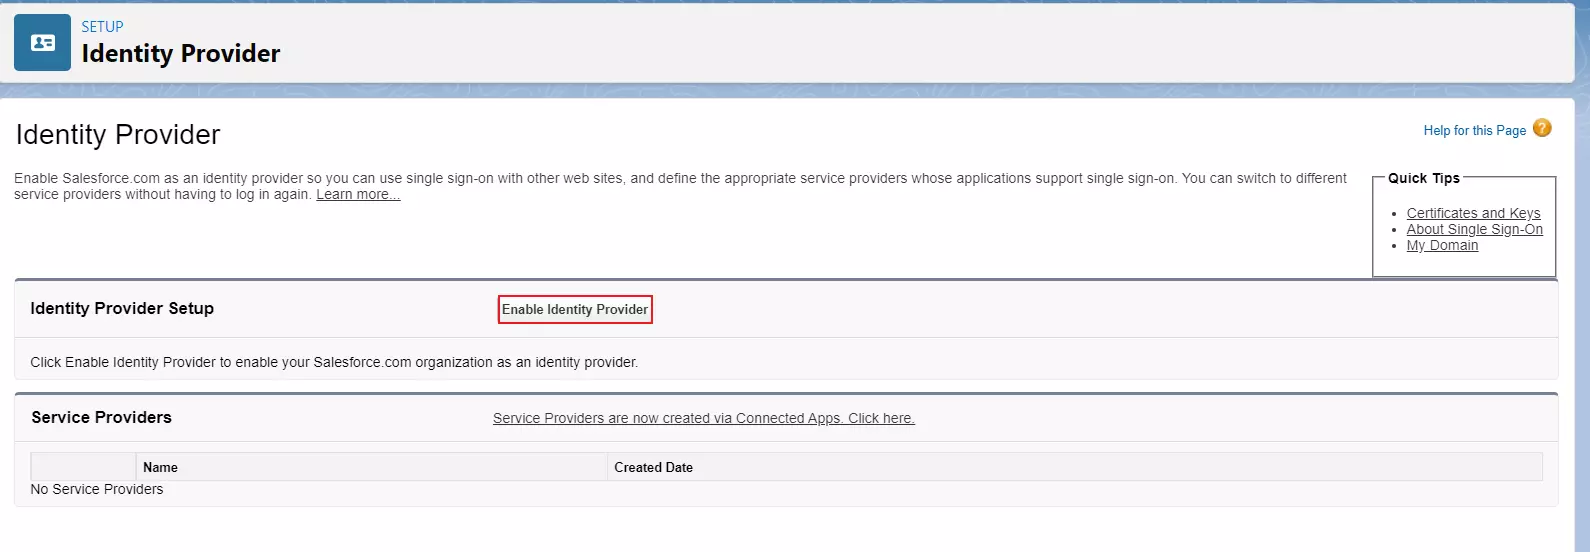 Configuring Salesforce as IdP : Enable IDP option to see Salesforce SAML endpoints